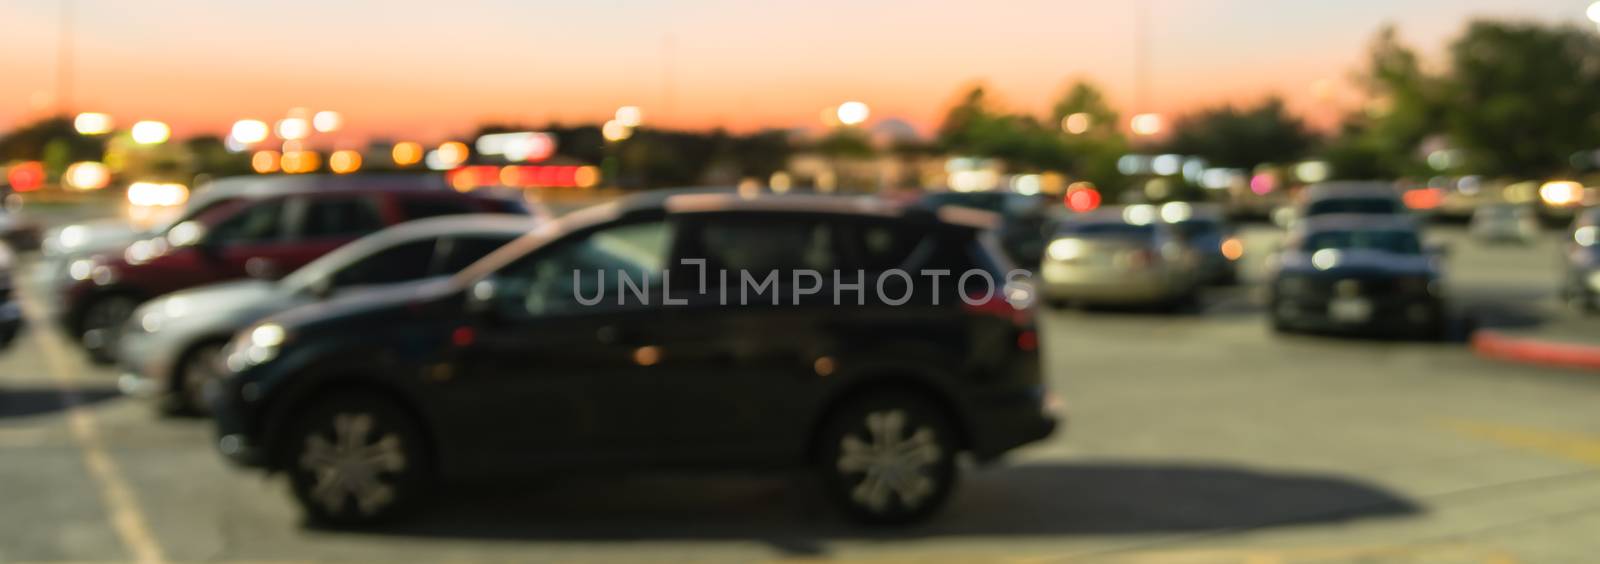 Panoramic blurry background outdoor parking lots of shopping mall in Houston, Texas at sunset by trongnguyen